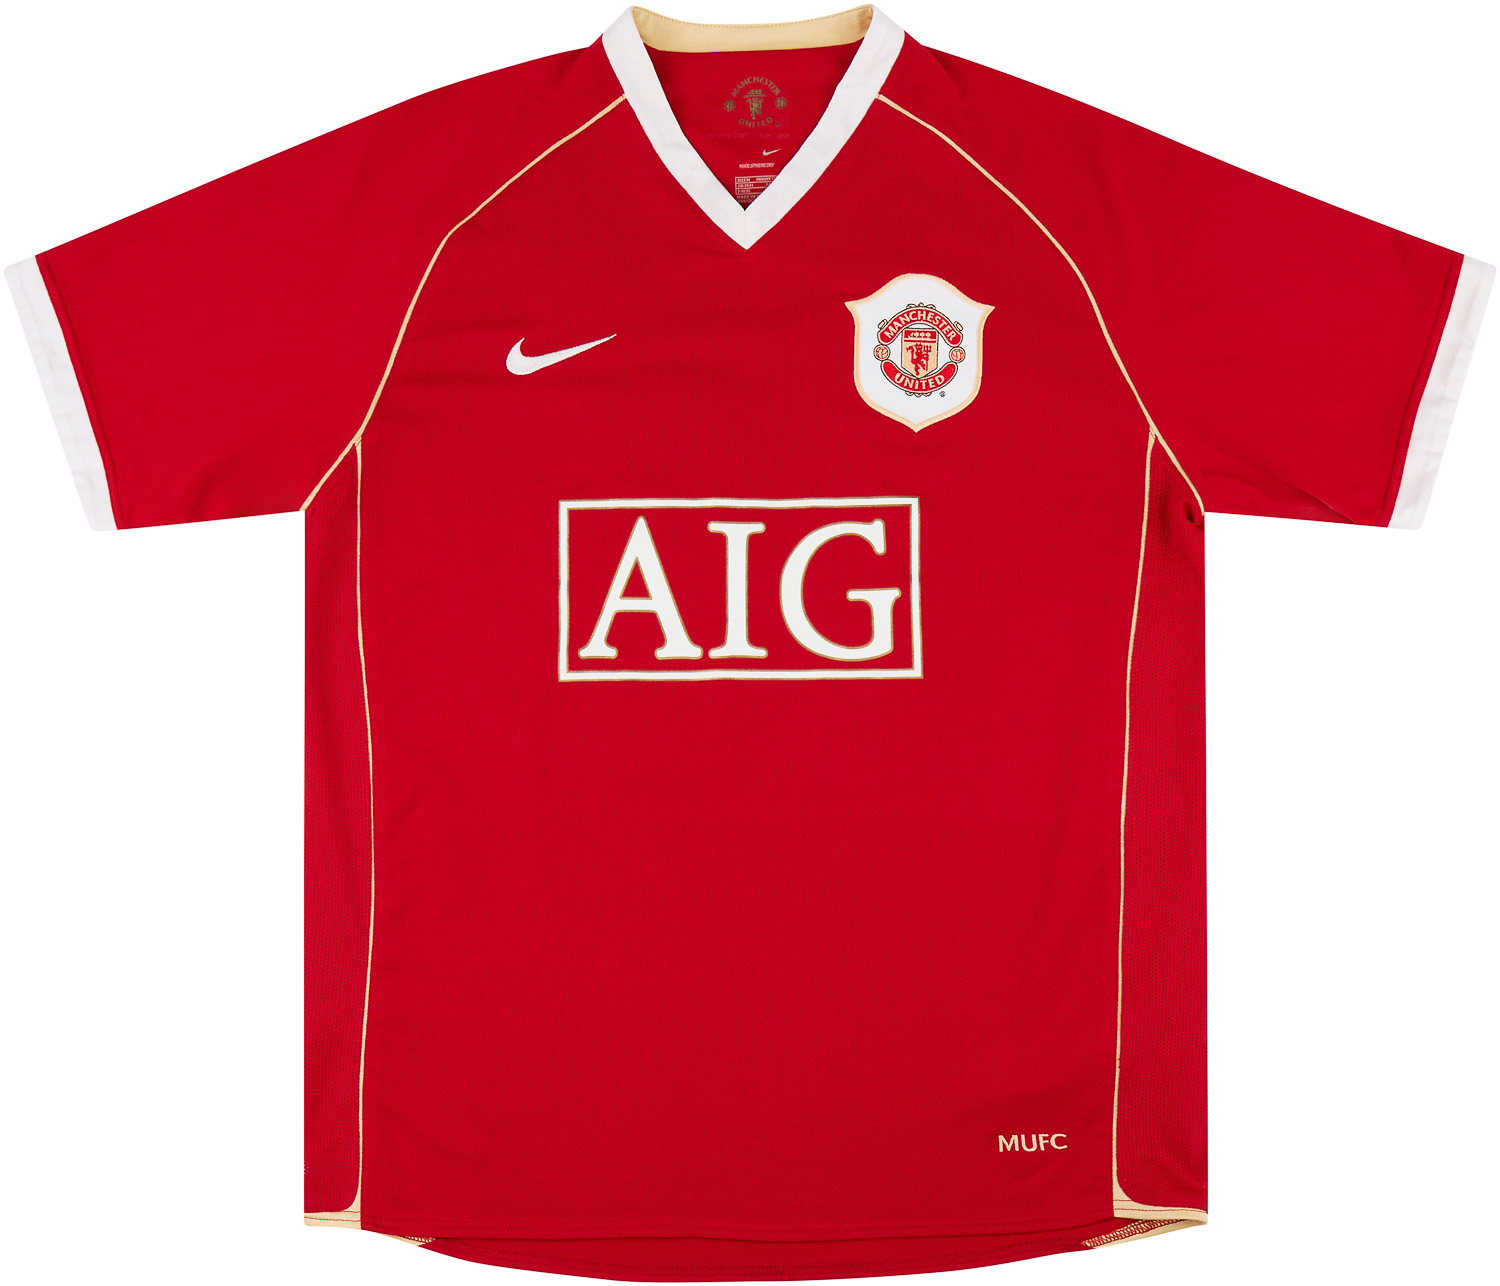 2006-07 Manchester United Home Shirt (7/10)